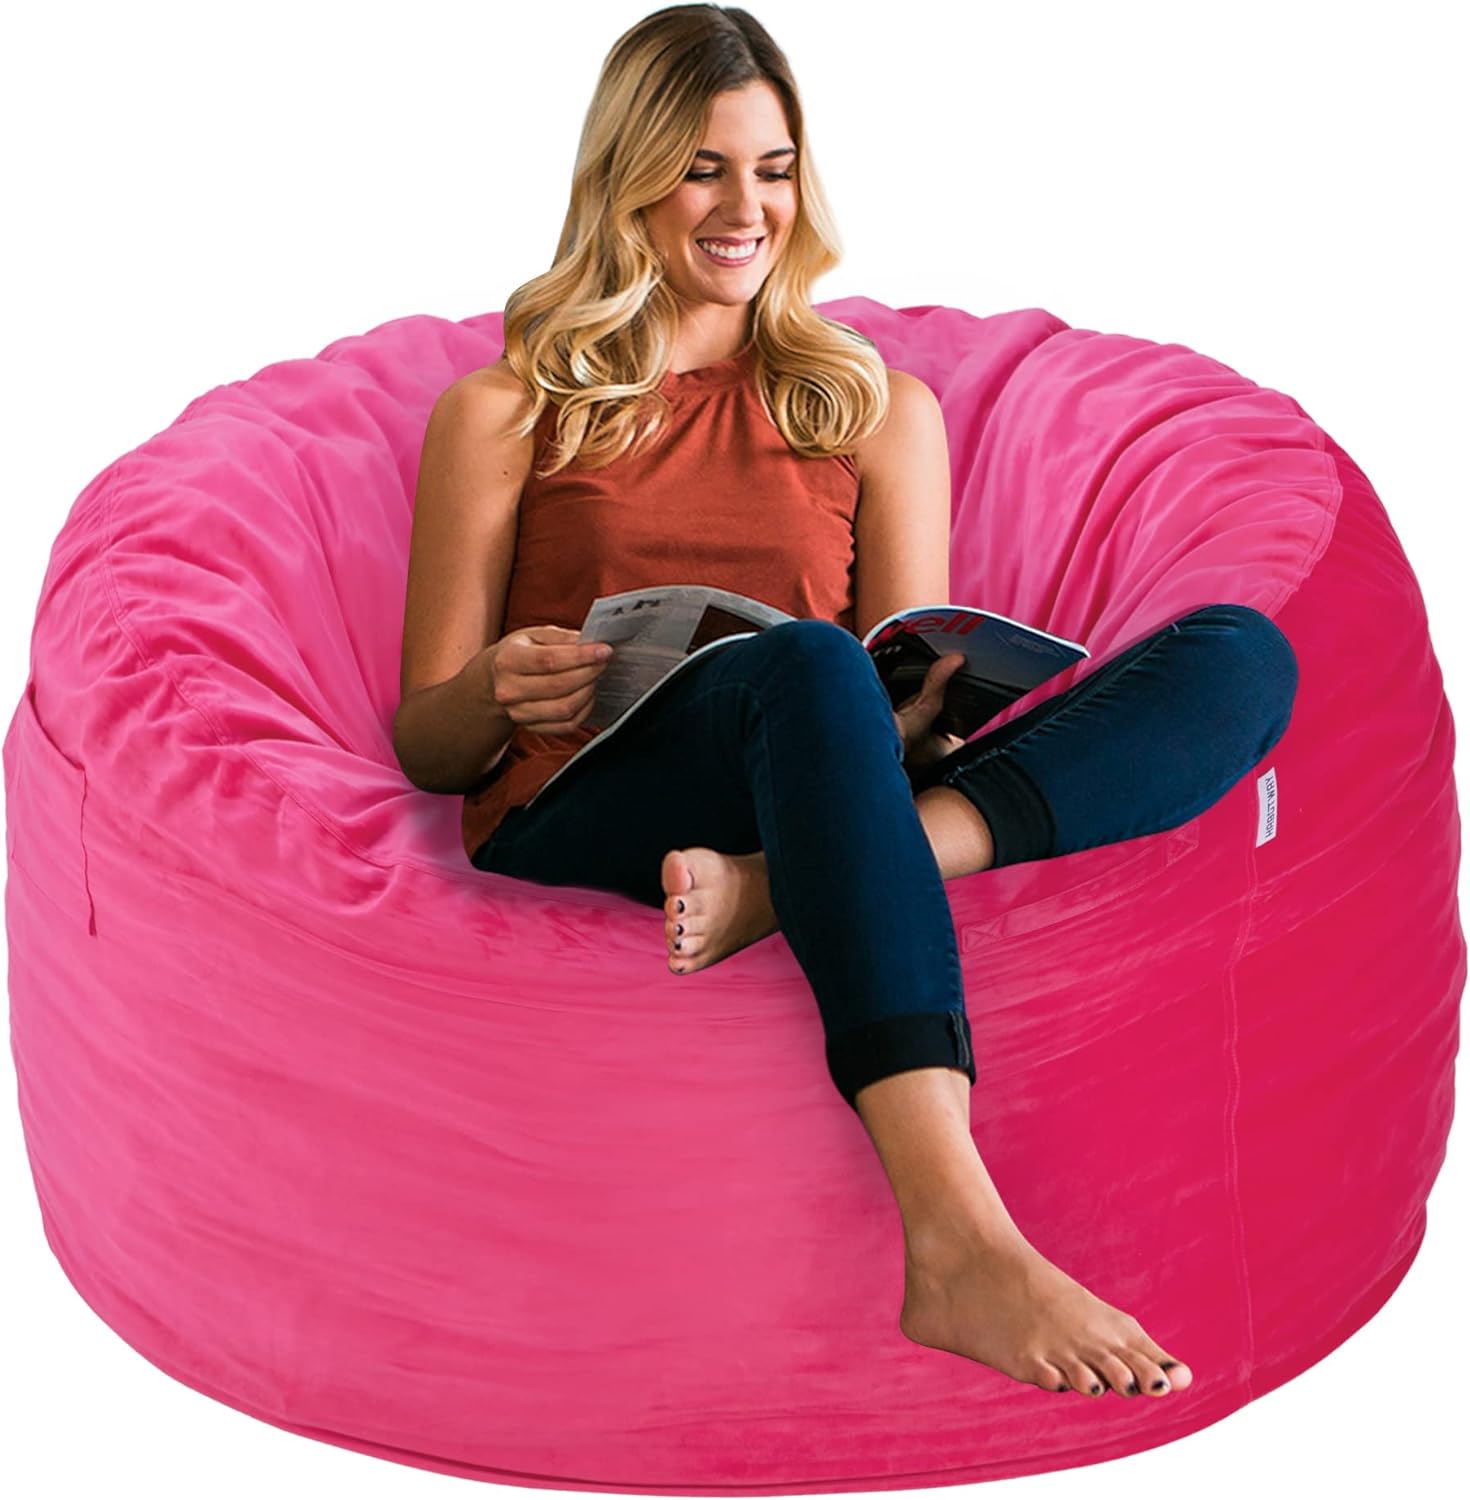 HABUTWAY Bean Bag Chair 3Ft Luxurious Velvet Ultra Soft Fur with High-Rebound Memory Foam Bean Bag Chairs for Adults Plush Lazy Sofa with Fluffy Removable Sponge 3'(Red)